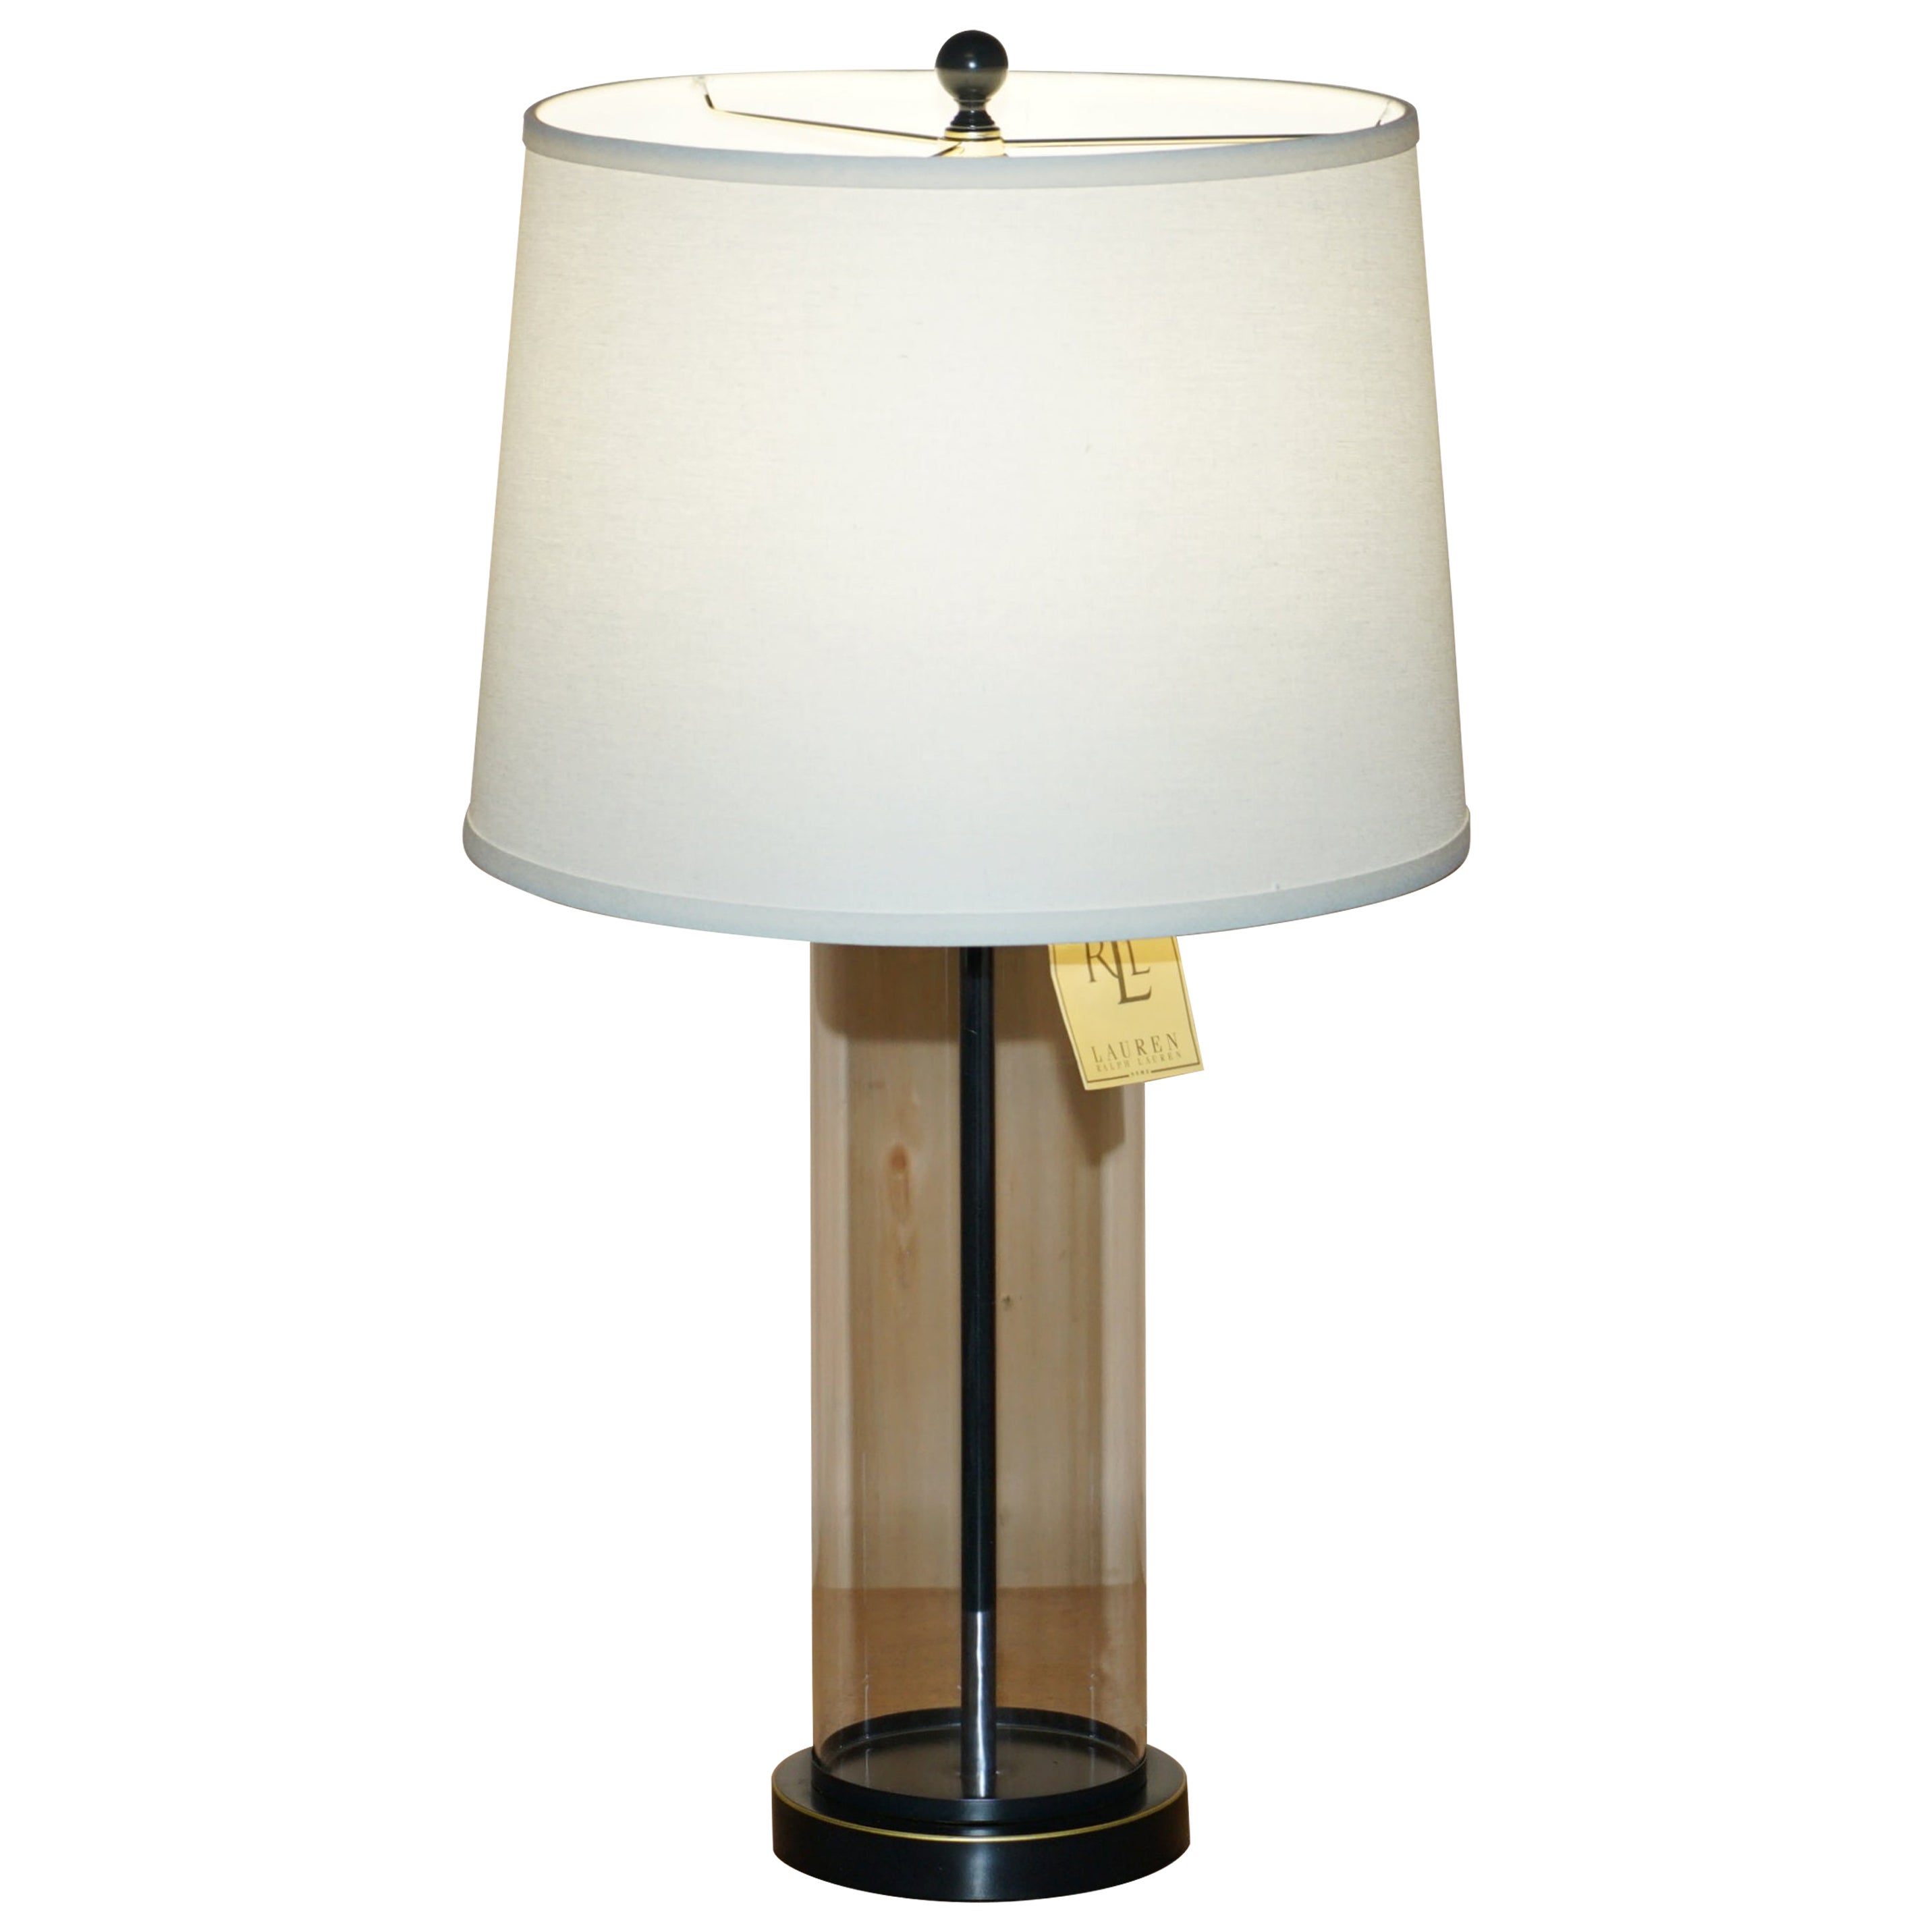 1 OF 4 BRAND NEW IN THE BOX RALPH LAUREN NAVY STORM LANTERN GLASS TABLE LAMPs For Sale